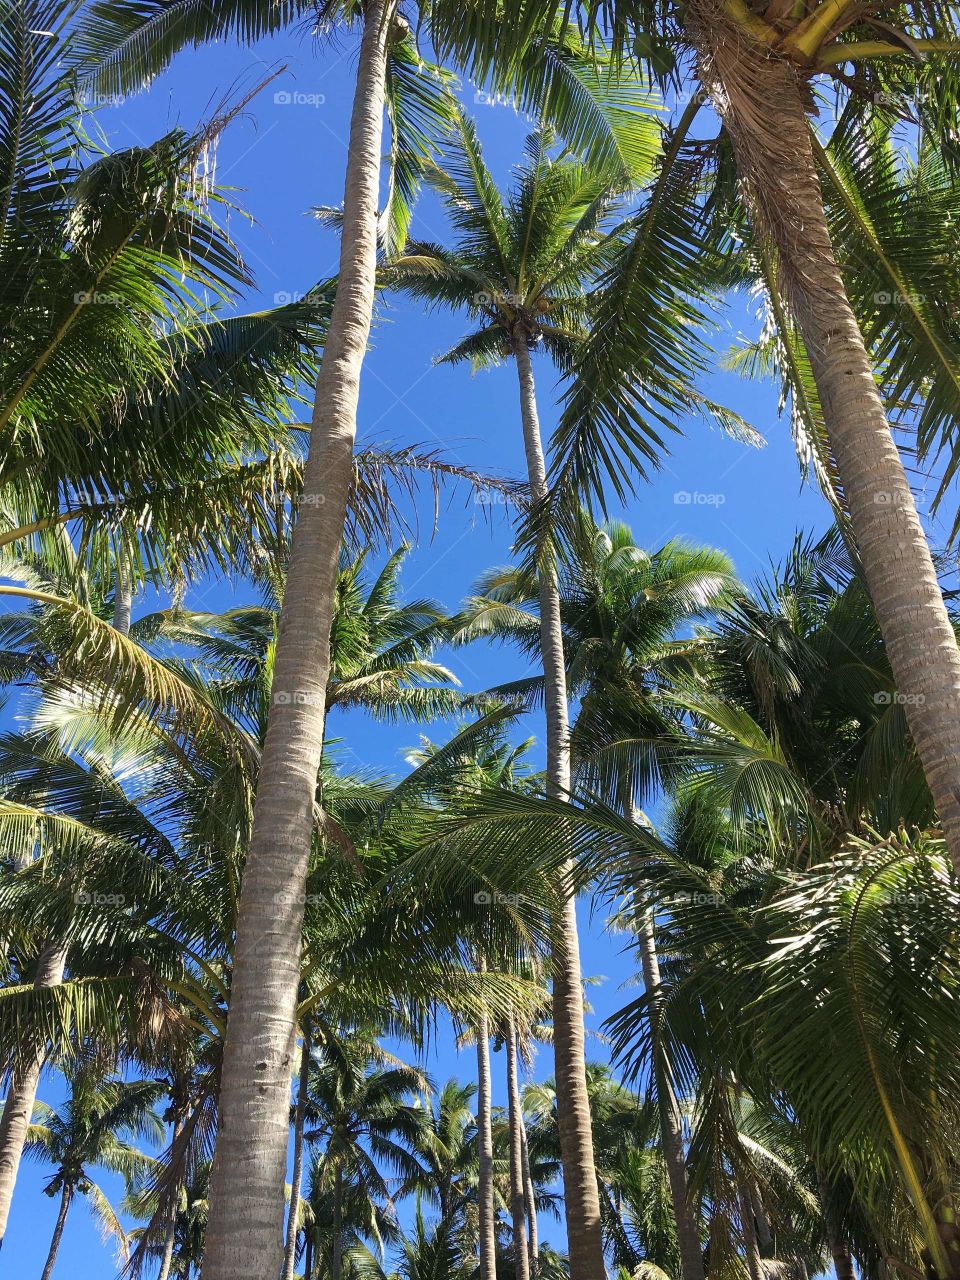 Tall vibrant coconut trees, shading the sun, truly a masterpiece like a skyscrapers in the beach.